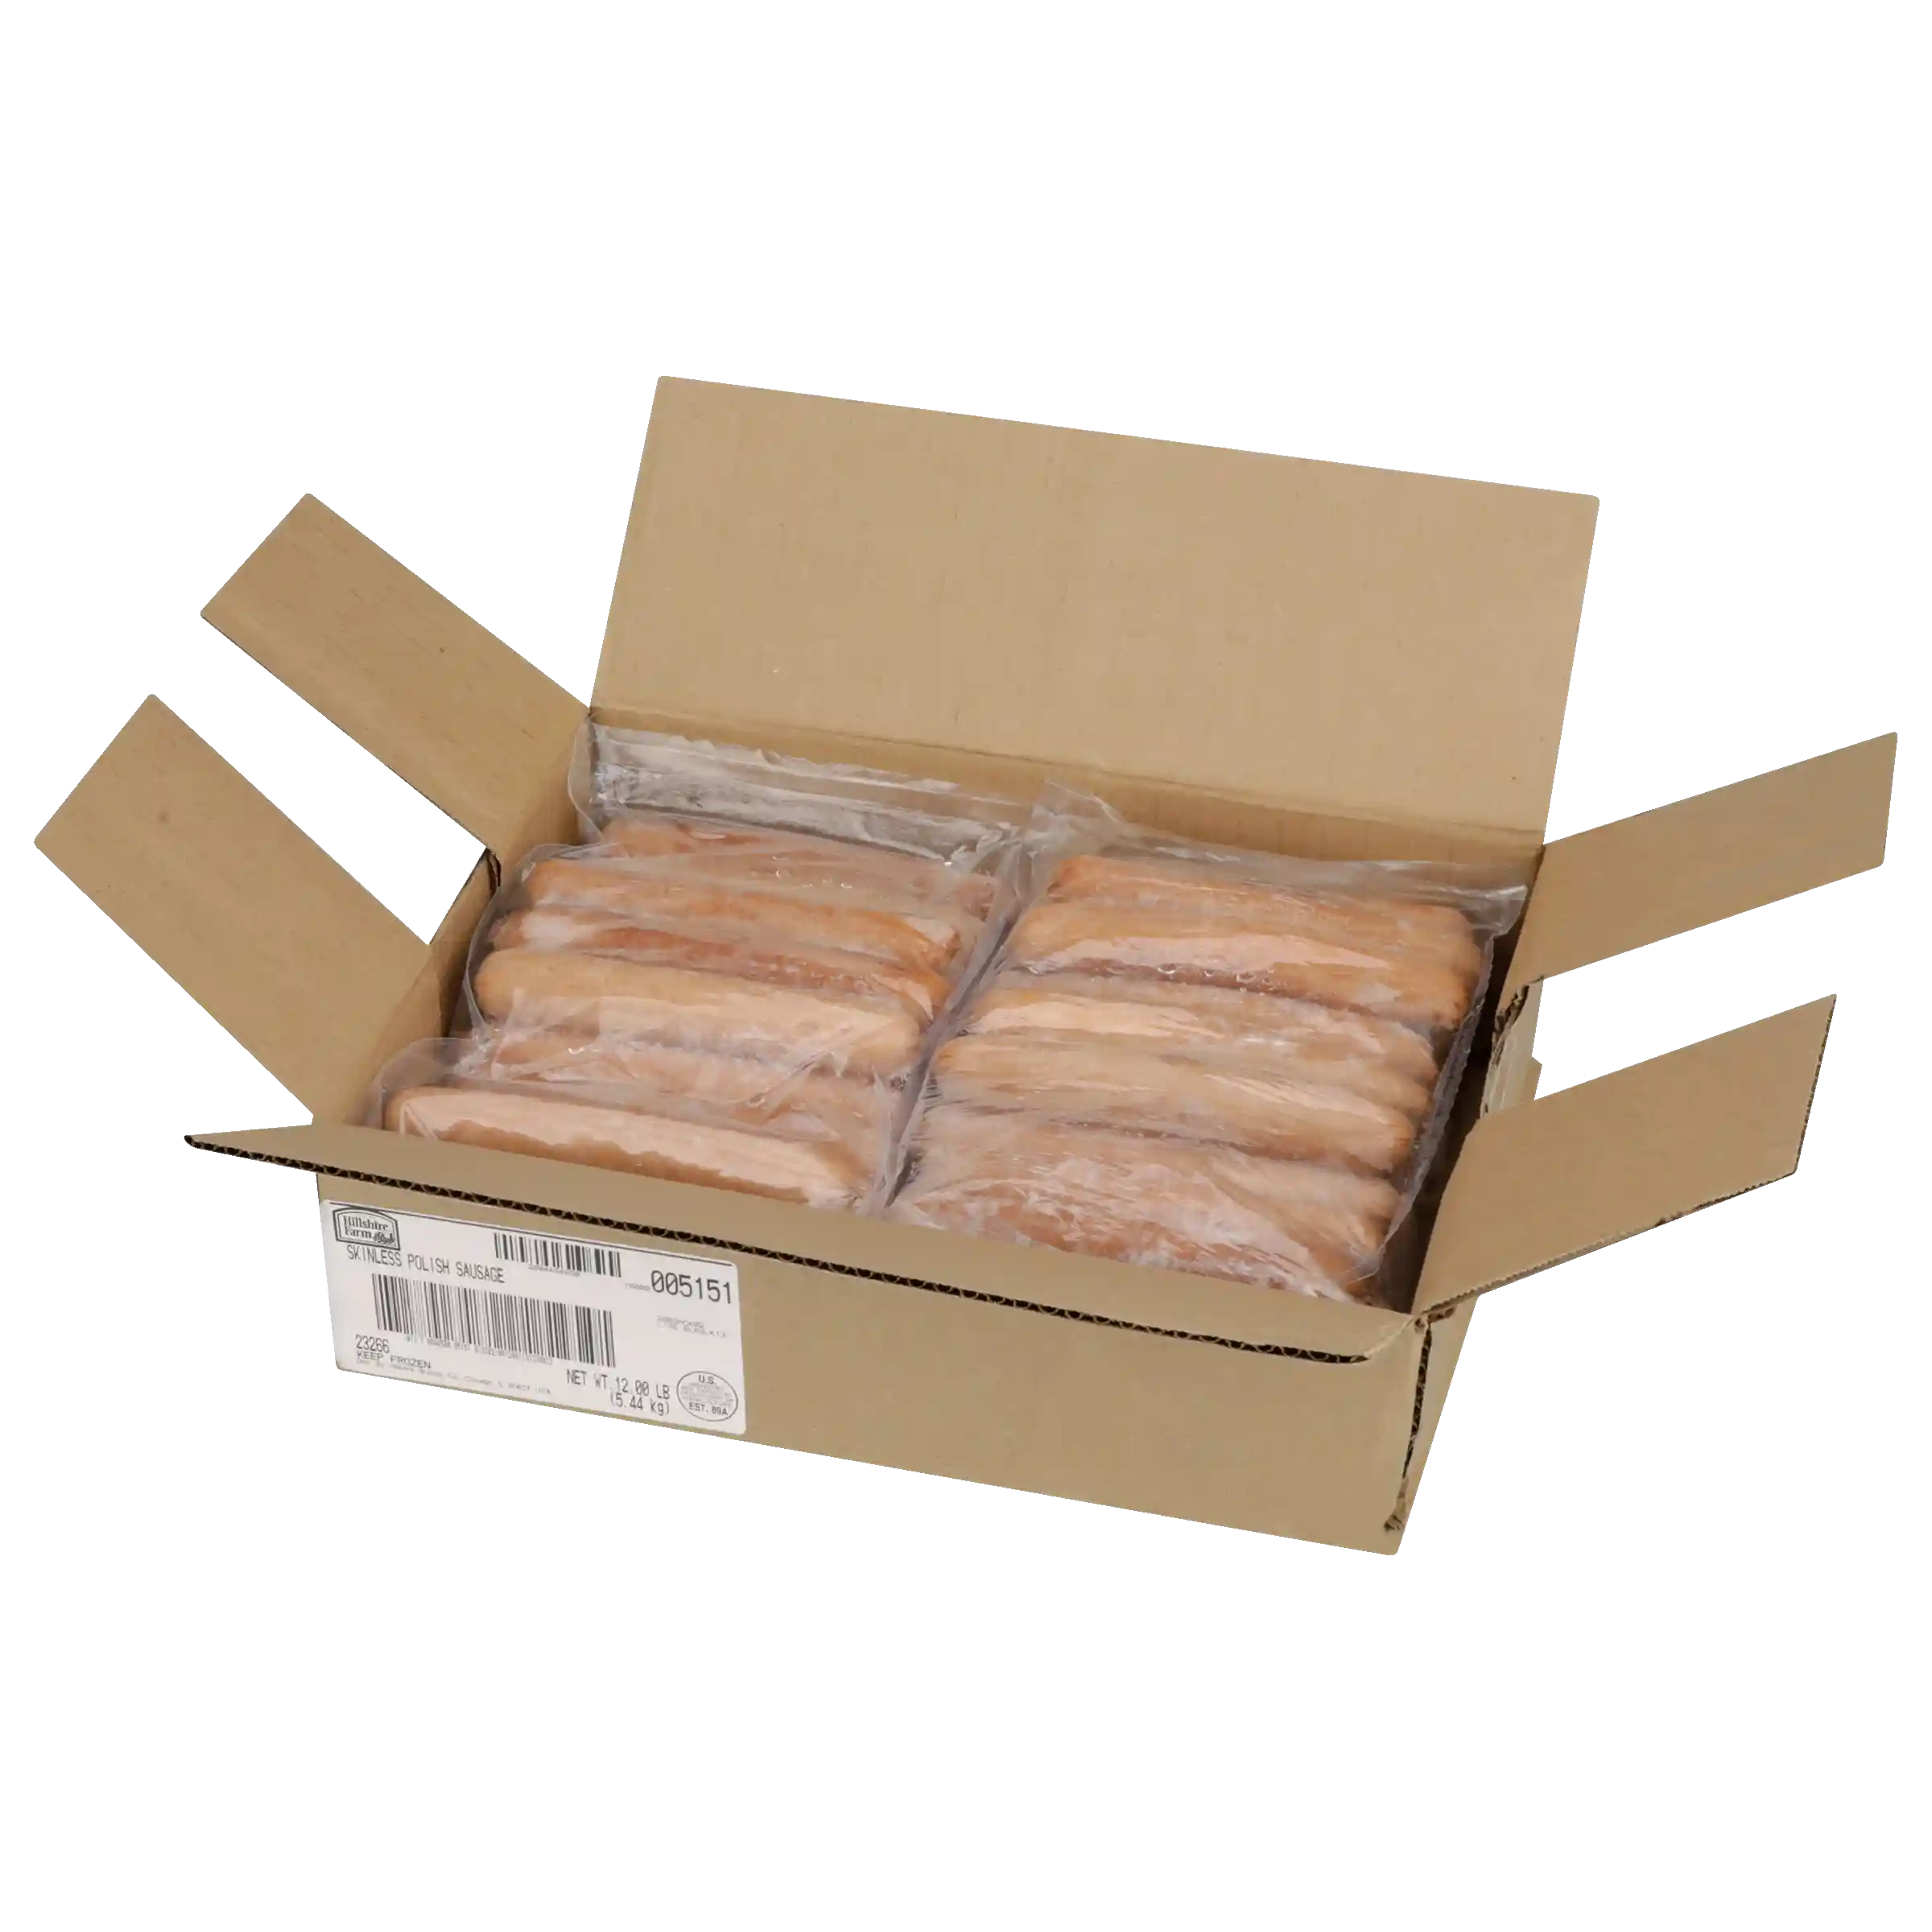 Hillshire Farm® Fully Cooked Skinless Polish Sausage Links, 5:1 Links Per Lb, 6.75 Inch, 12 Lb_image_31